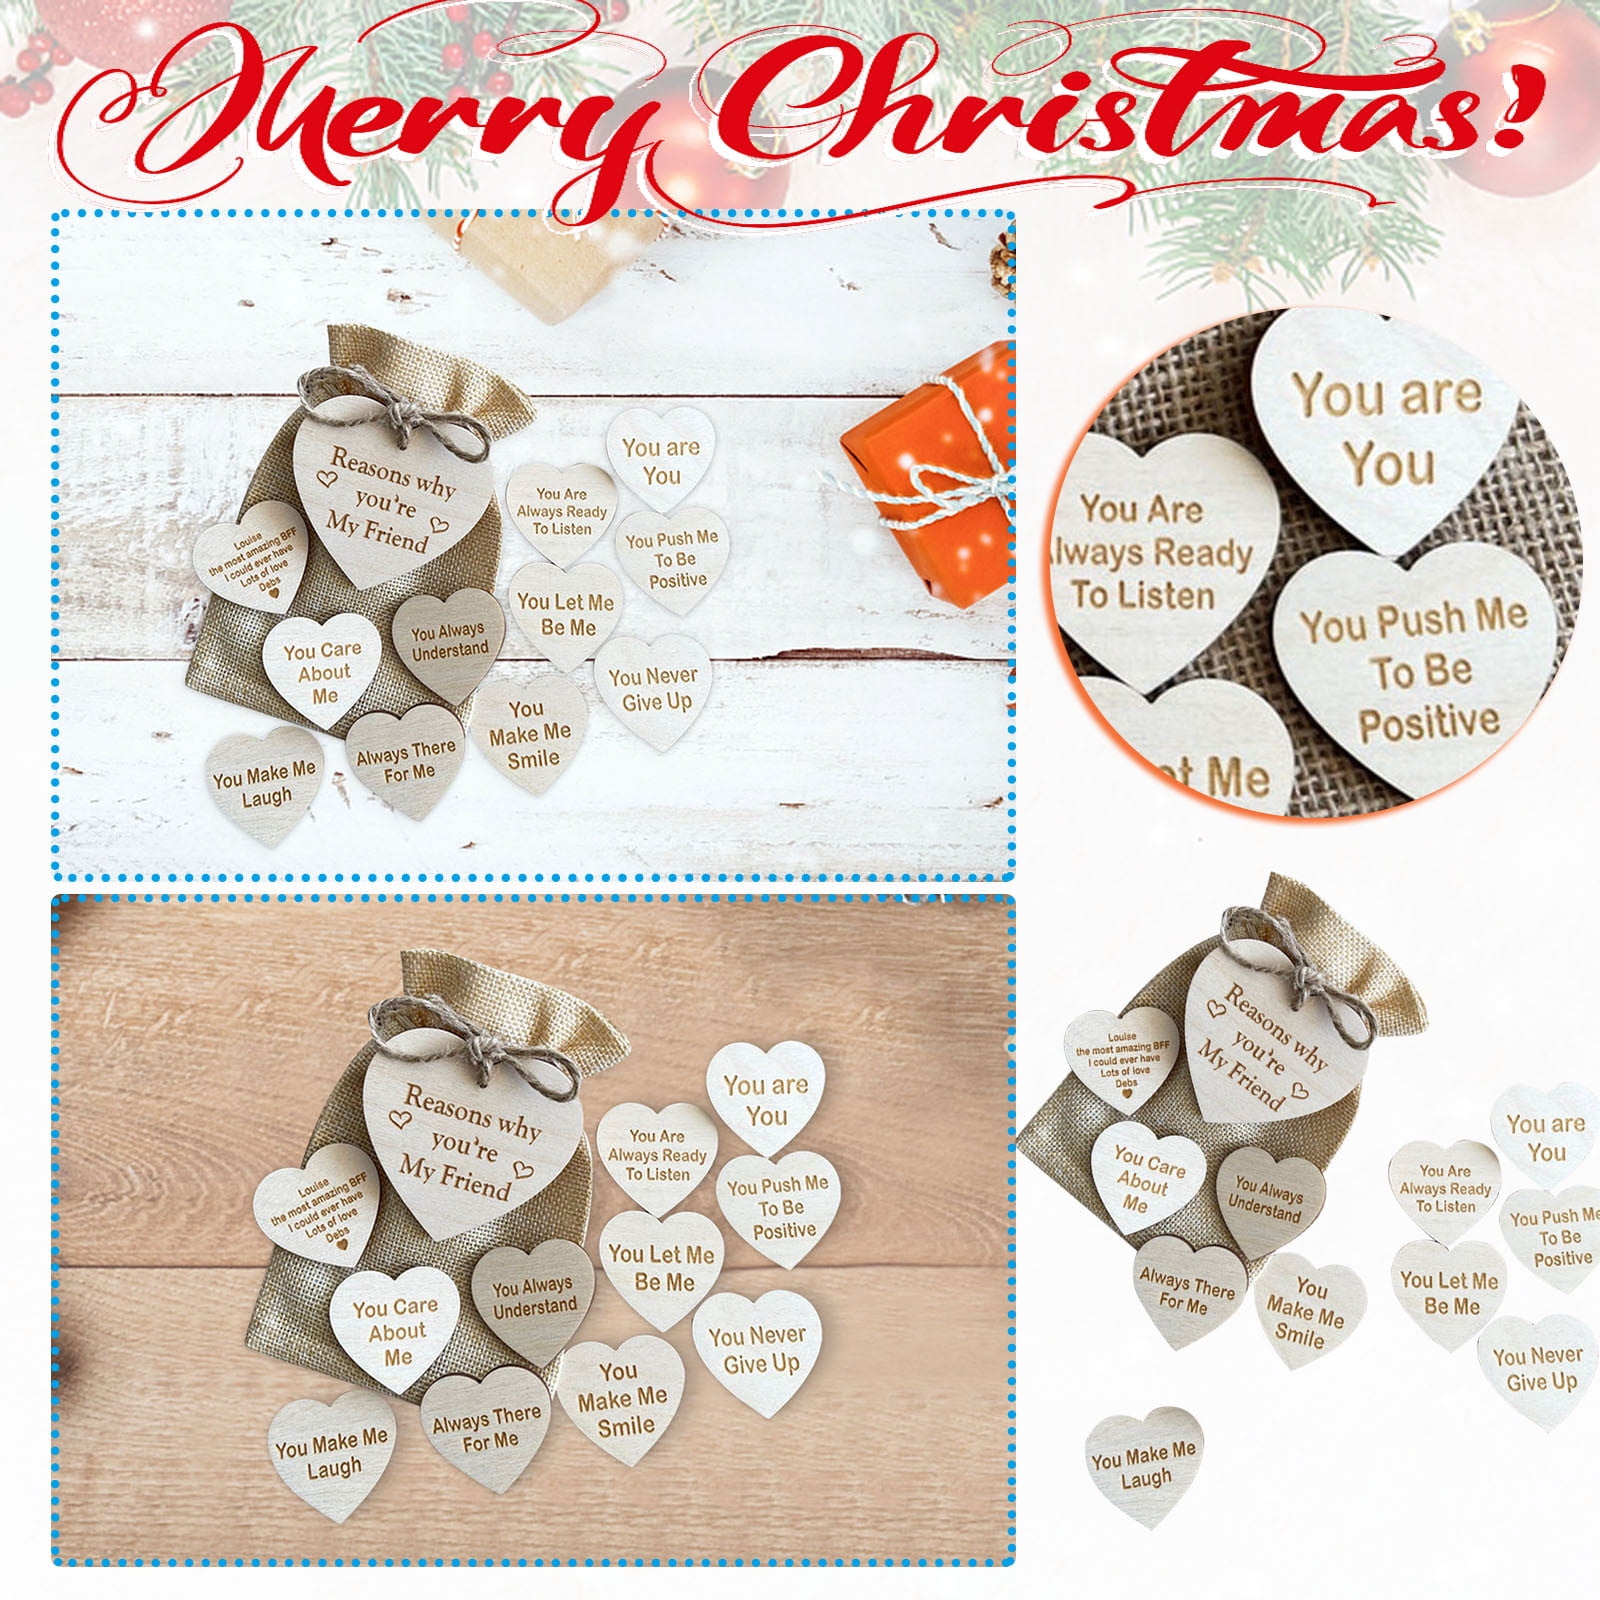 Gtizry Romantic I Love You Gifts for Best Friend, 10 Reasons Why I Love You  Wood Box & Hearts - Personalised Christmas, Birthday, Anniversary